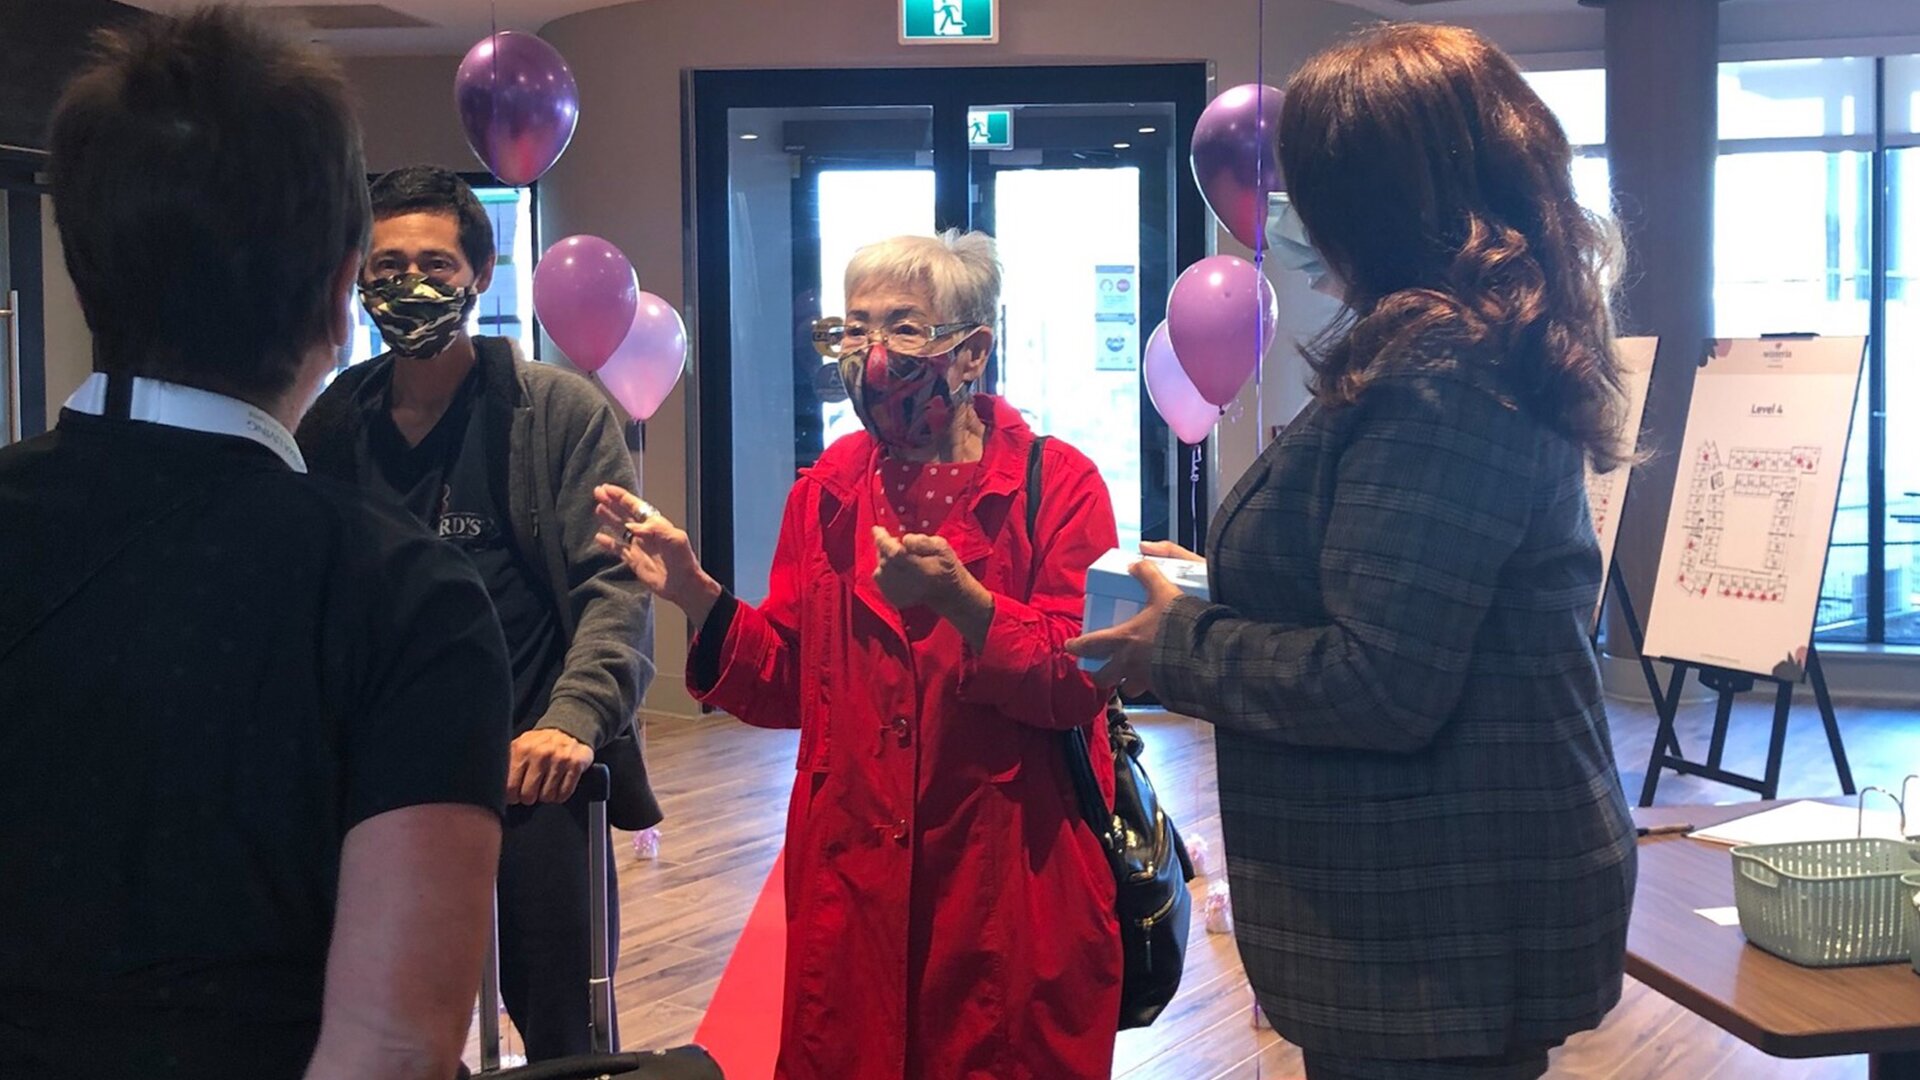 A new resident being welcomed into a senior living community